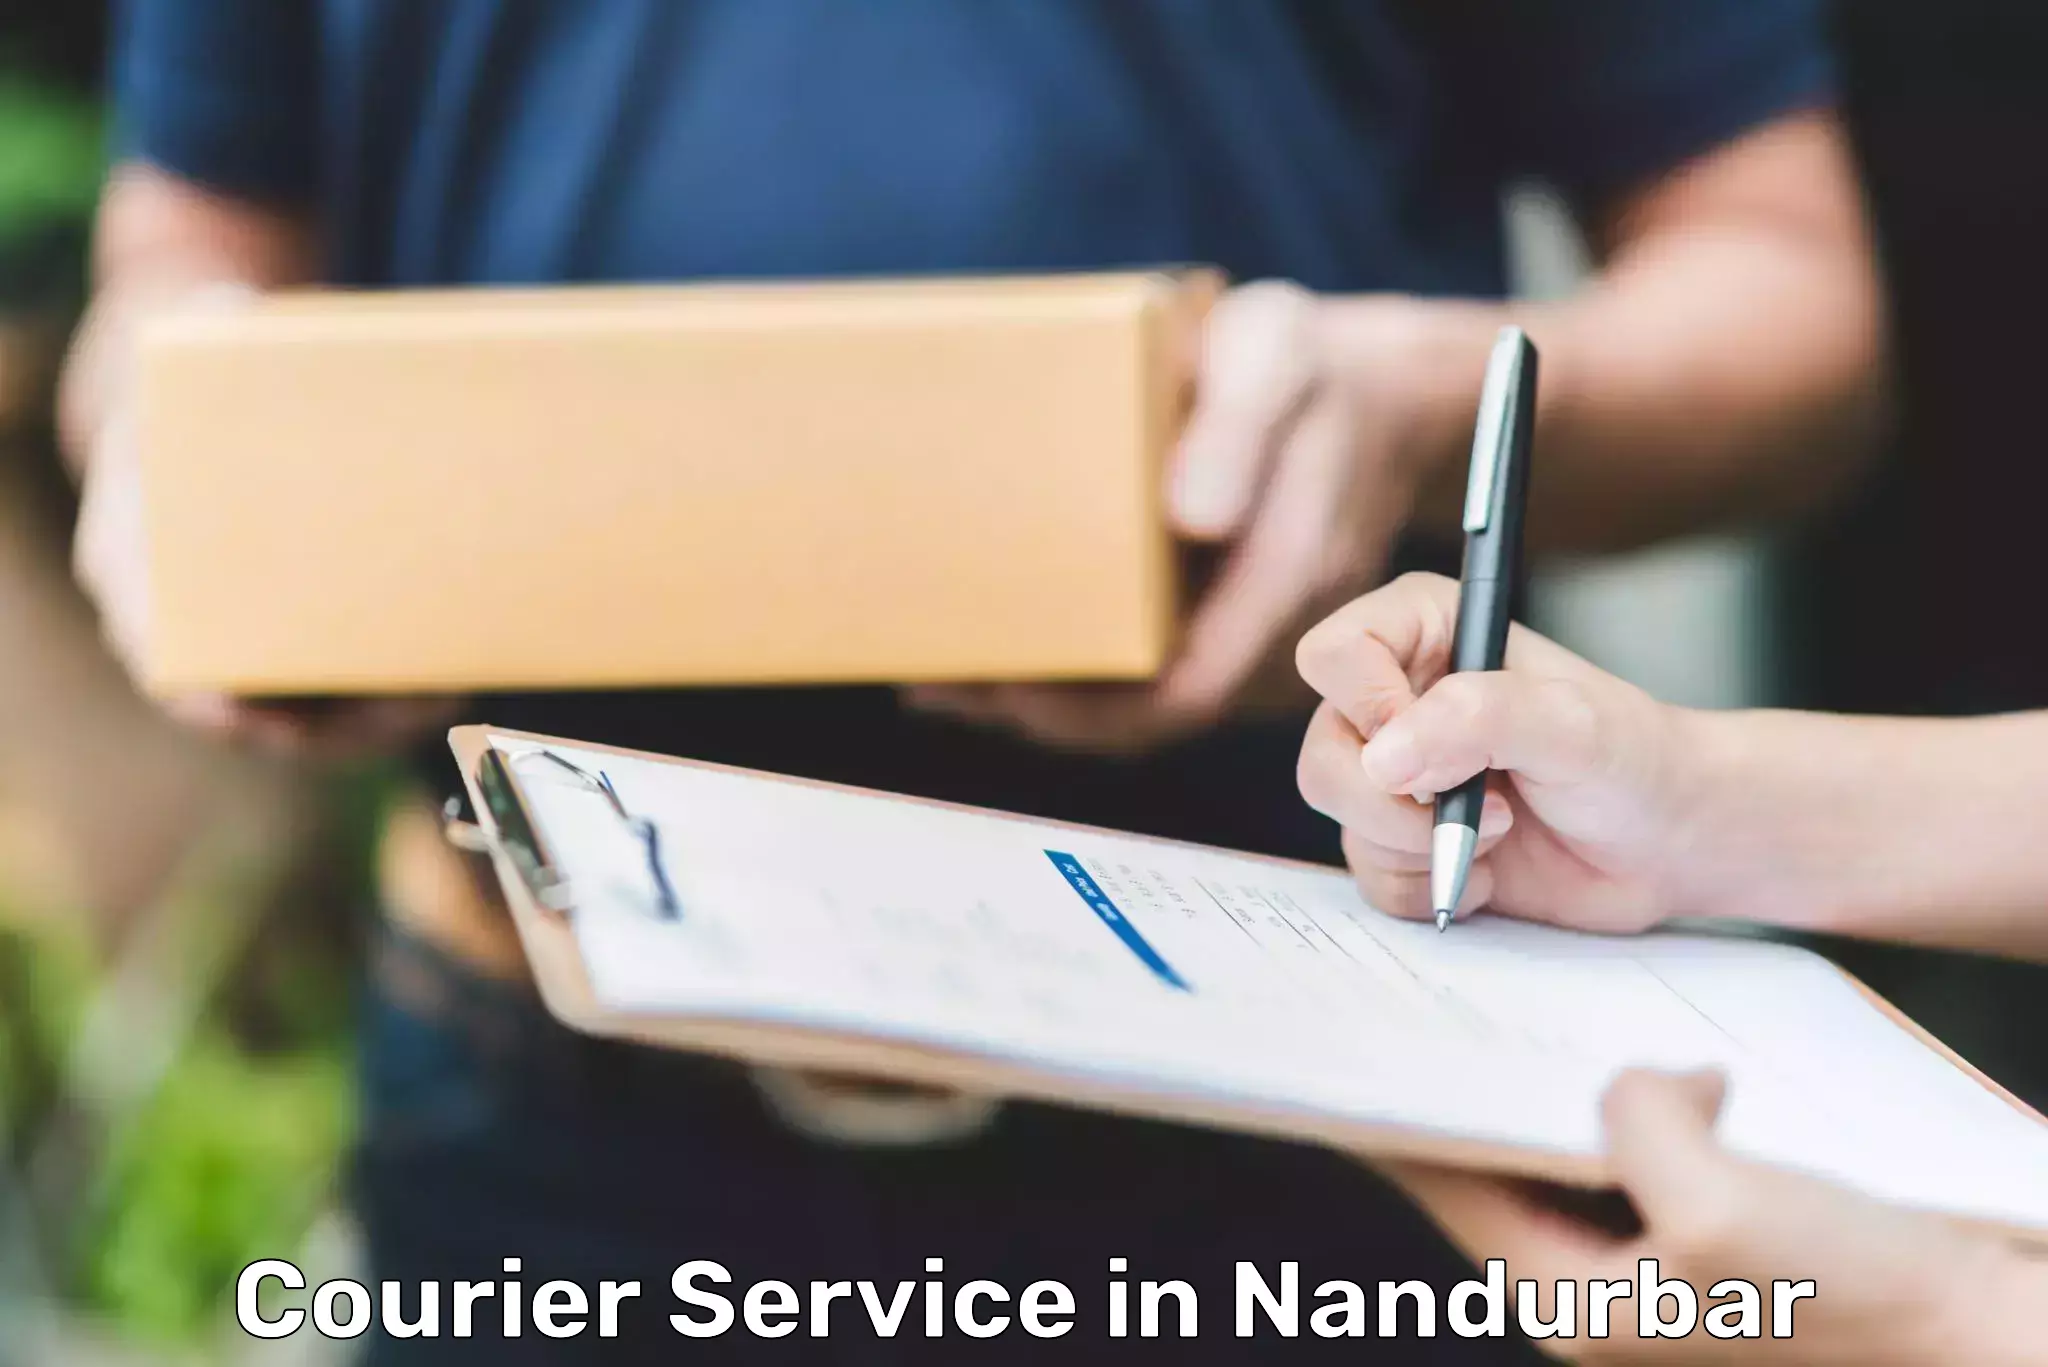 Next-day delivery options in Nandurbar